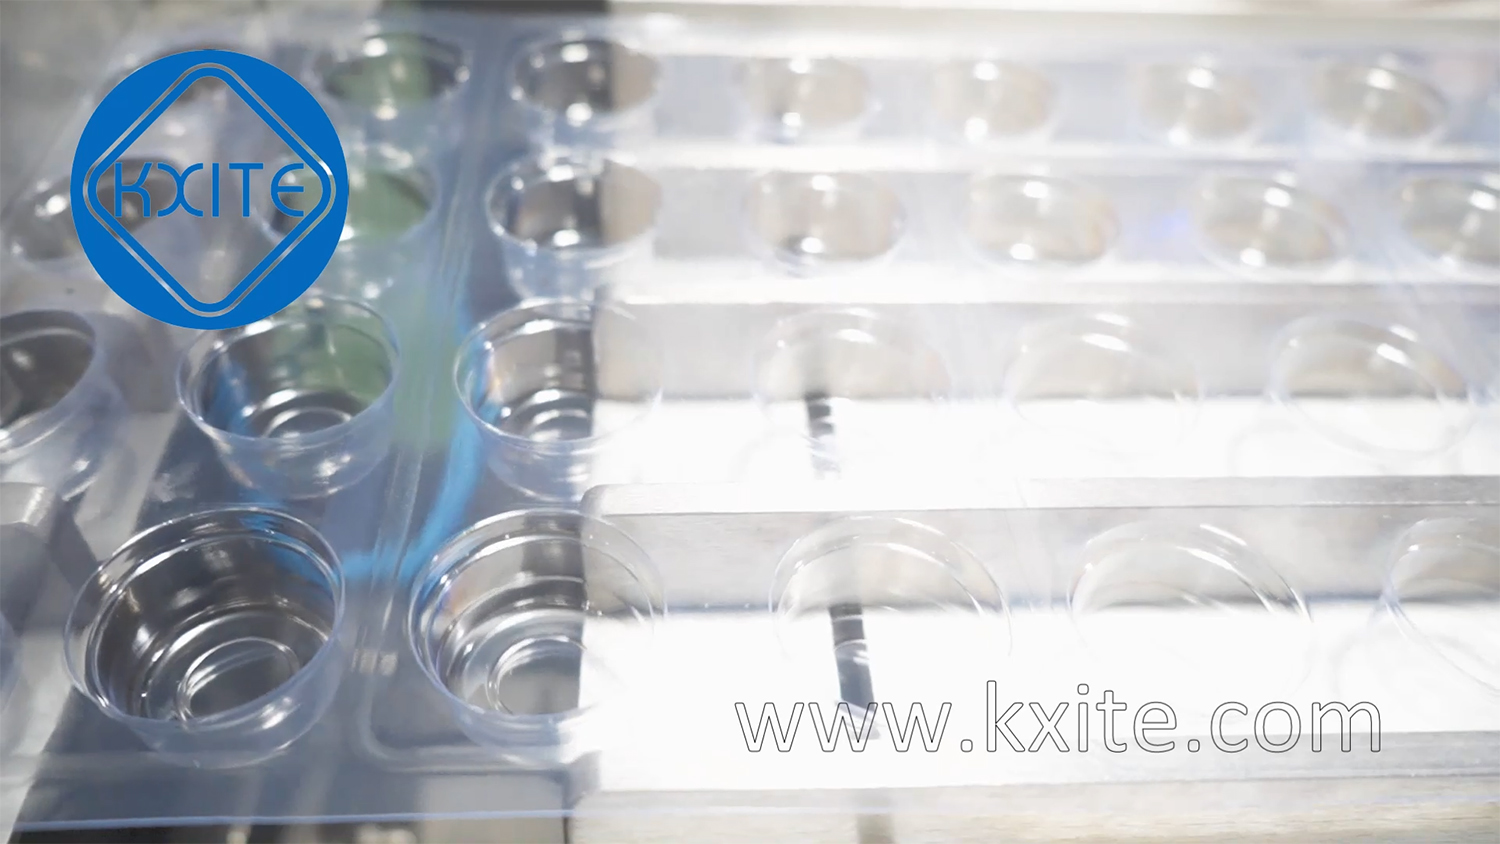 Antibacterial Mouth Wash Water Liquid Blister Filling Sealing Packing Machine